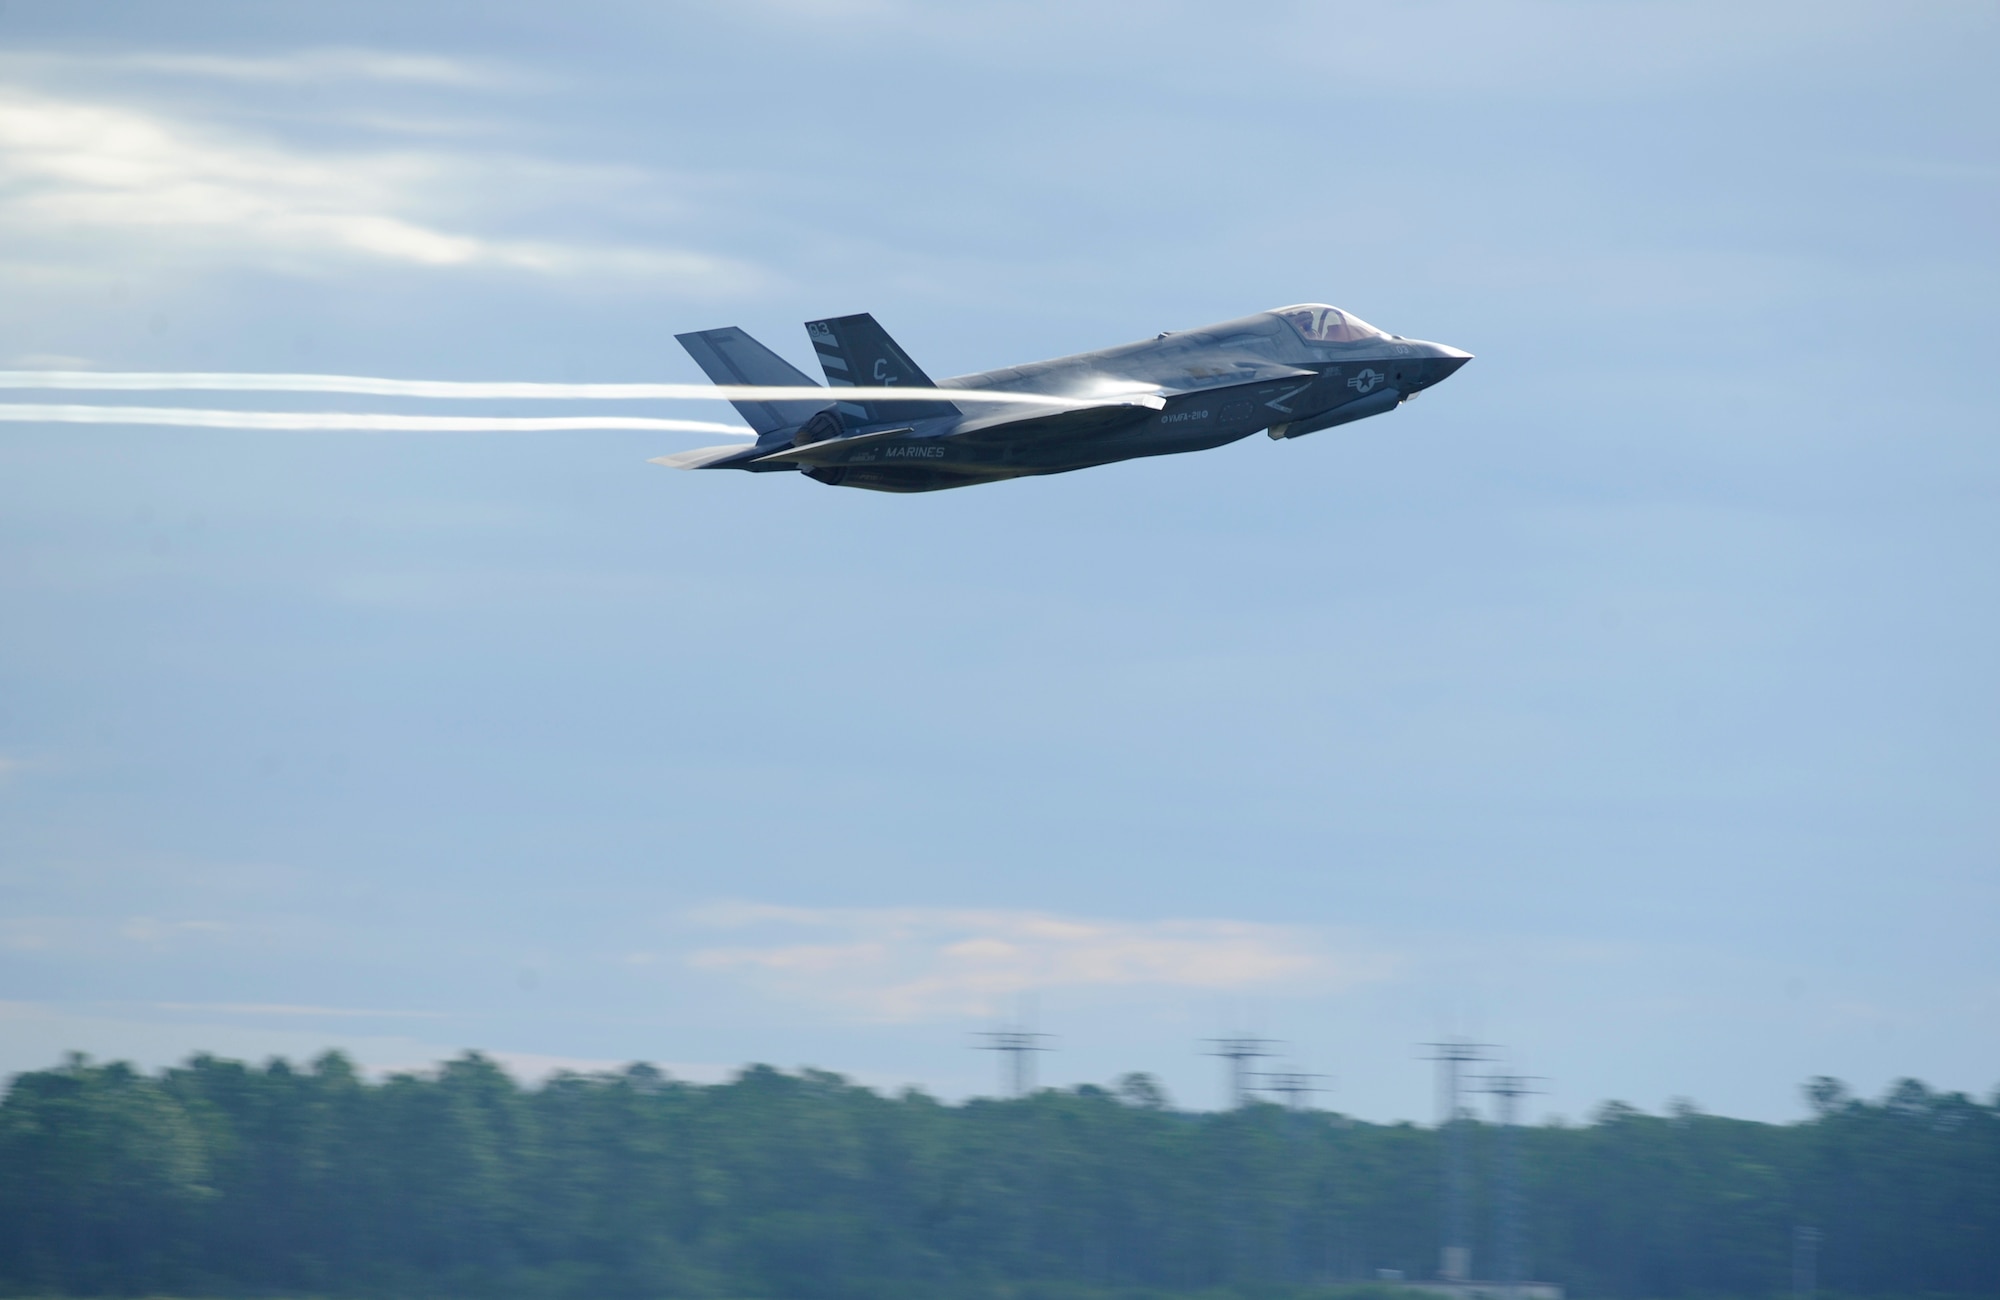 A U.S. Marine F-35 Lightning II from the Marine Fighter Attack Squadron (VMRA) 211, takes off just above the treeline during a 53rd Weapon Evaluation Group Weapon System Evaluation Program from the Tyndall flightline Sept. 16, 2016. This WSEP marked Marine Fighter Attack Squadron 211’s first deployment since standing up the unit on June 30, and was the first operational F-35 firing of a live air-to-air missile during Combat Archer. (U.S. Air Force photo by Senior Airman Solomon Cook/Released)